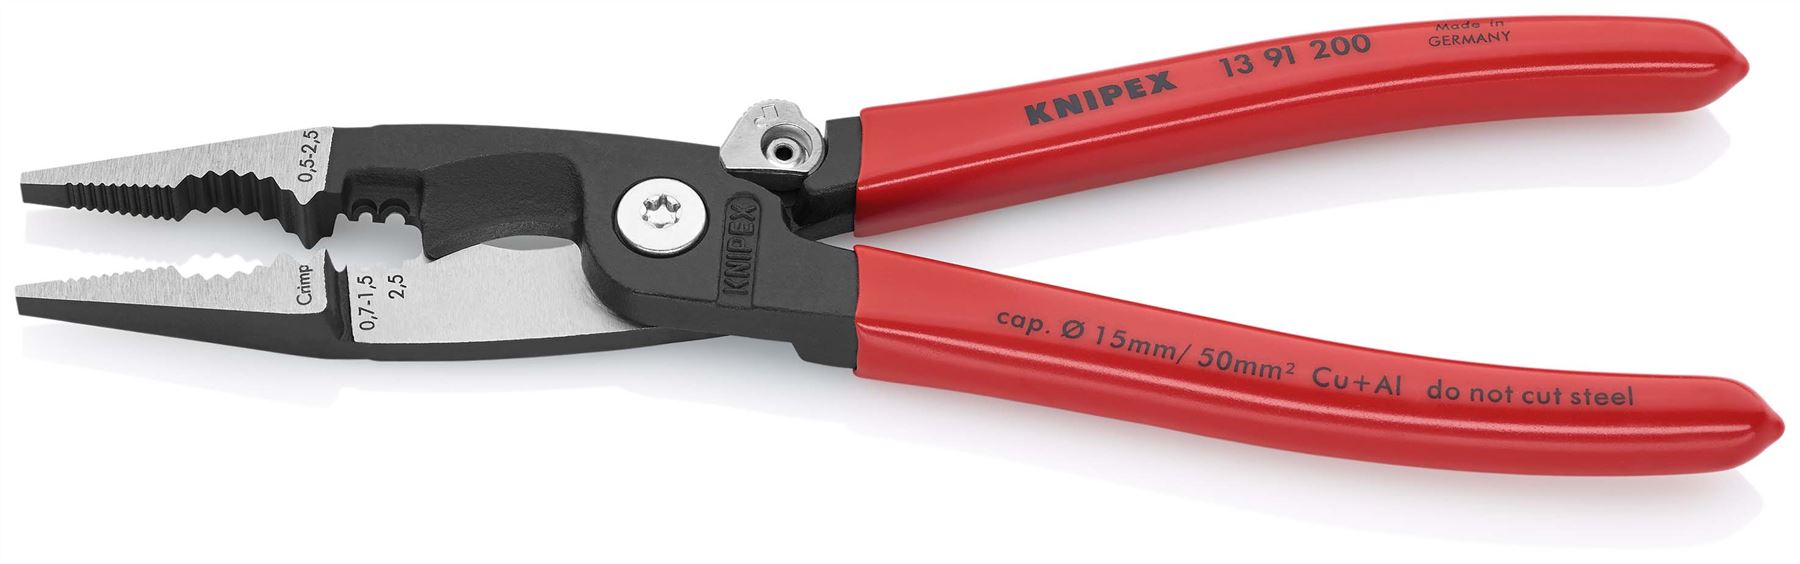 KNIPEX Pliers for Electrical Installation 200mm Plastic Coated 13 91 200 SB